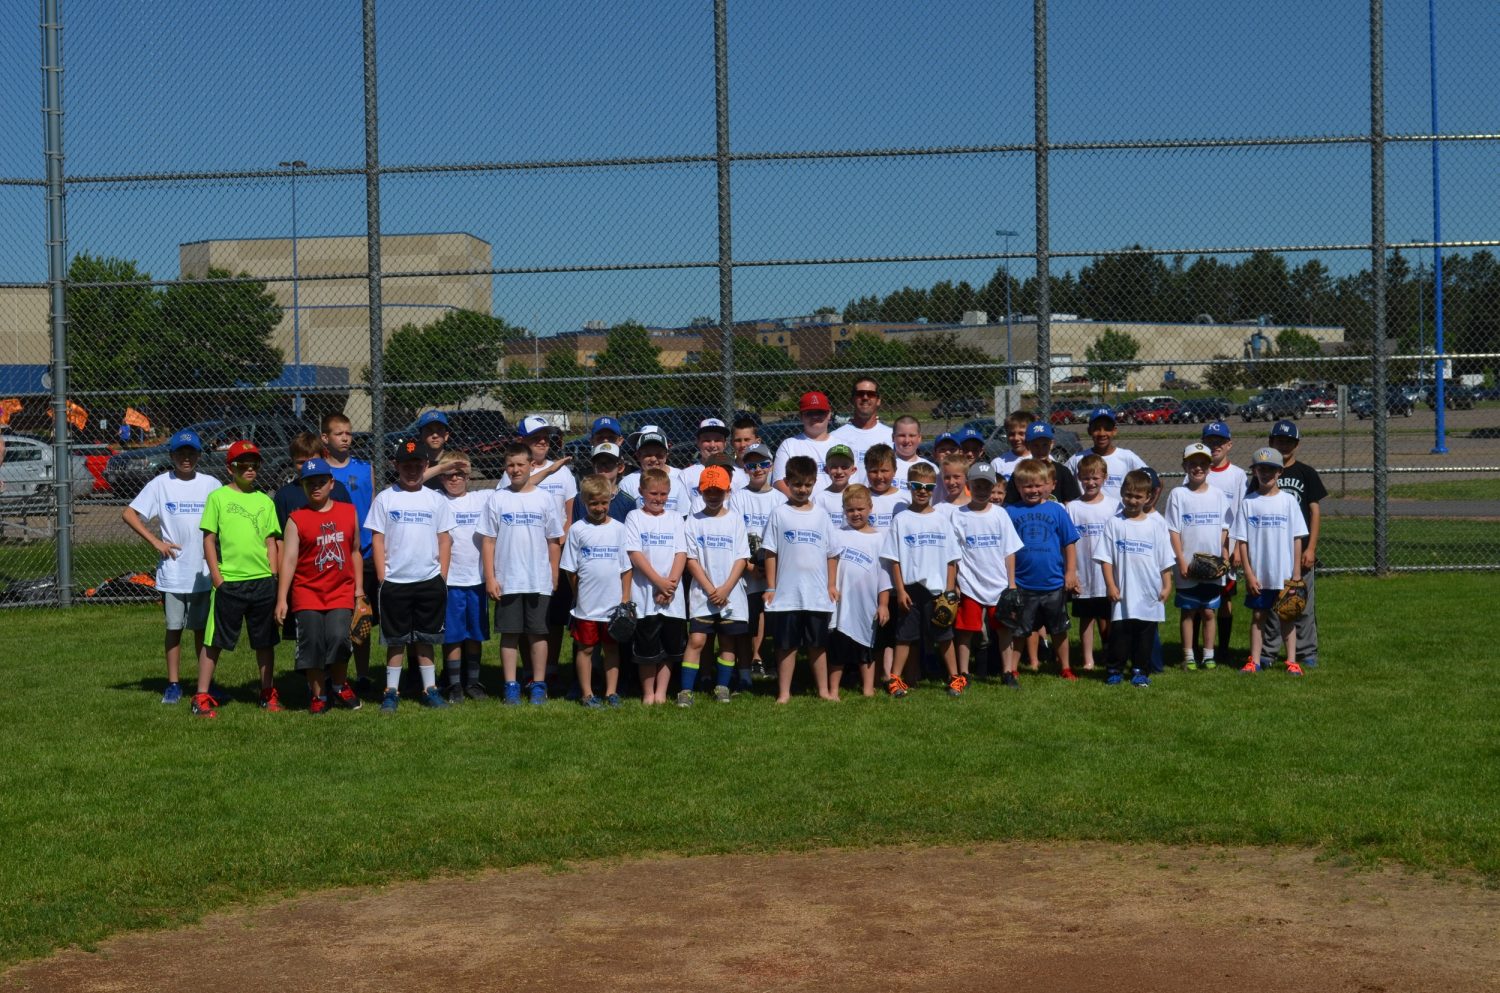 Merrill Baseball Camp comes to an end